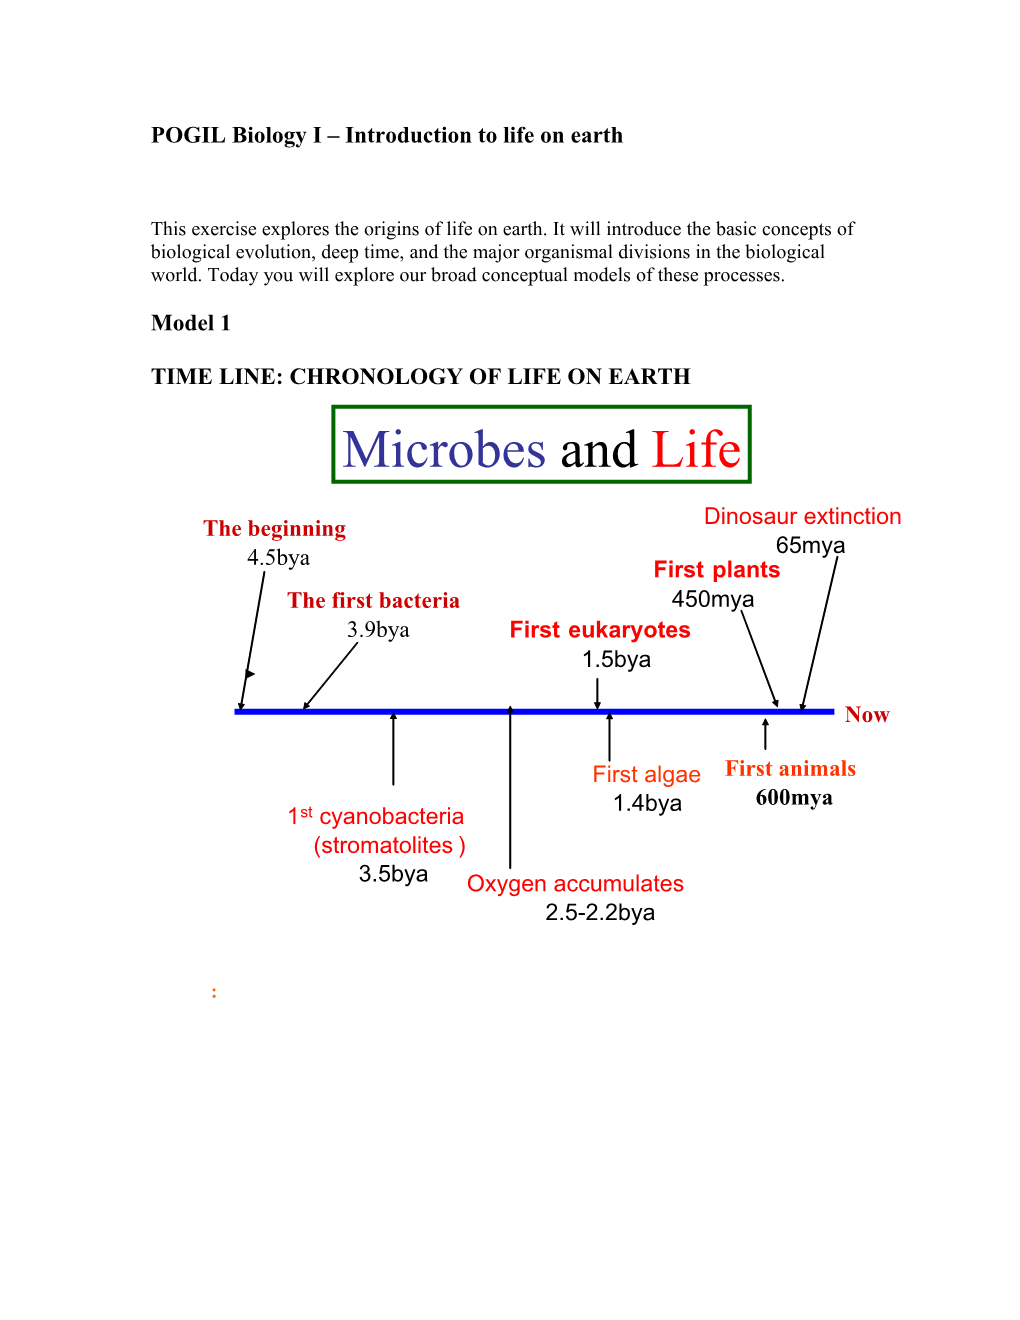 POGIL Biology I Introduction to Life on Earth